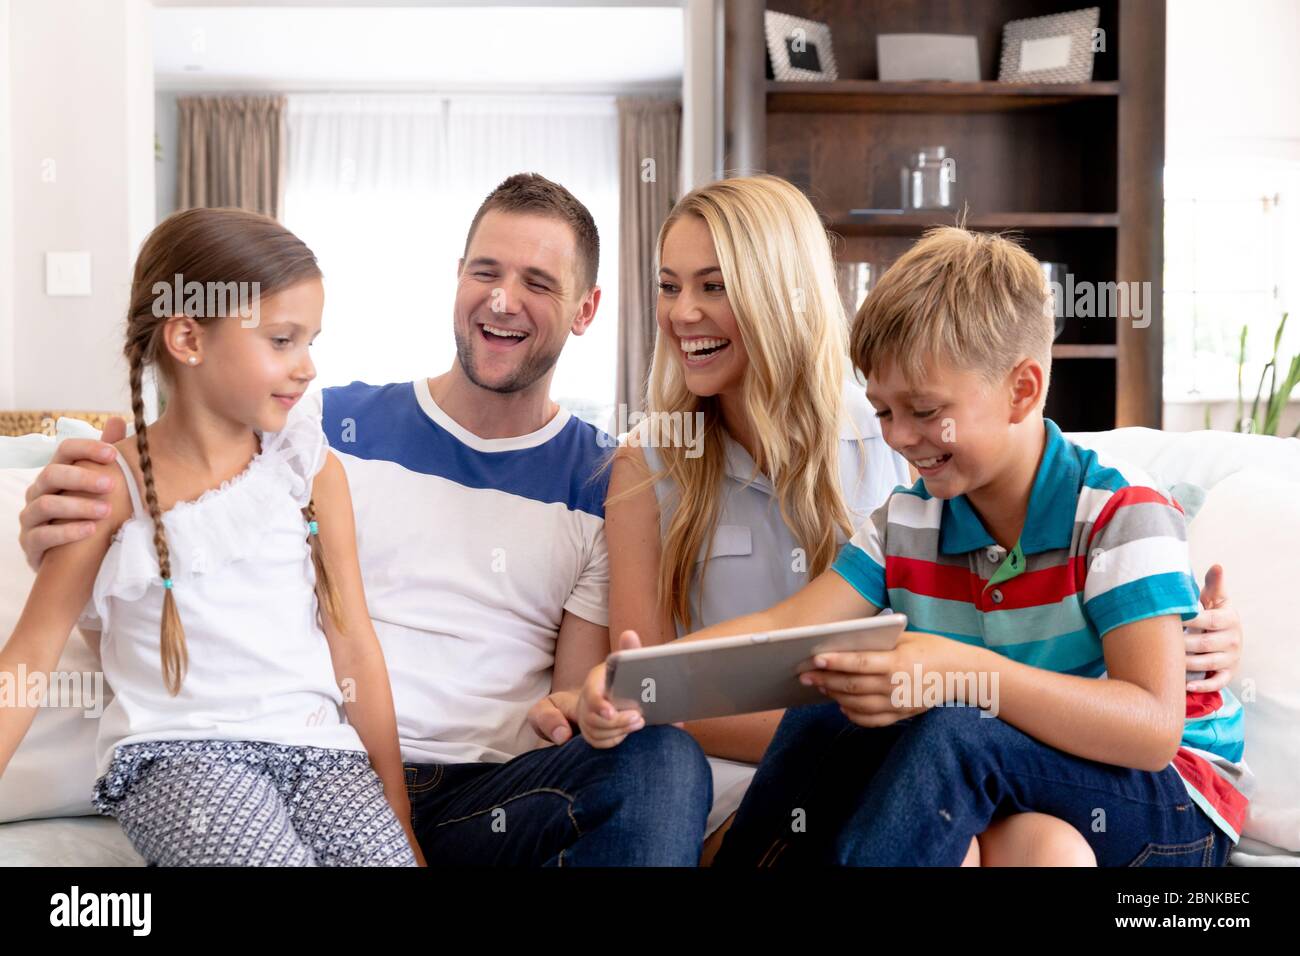 Caucasian family with two children using a tablet computer at home Stock Photo